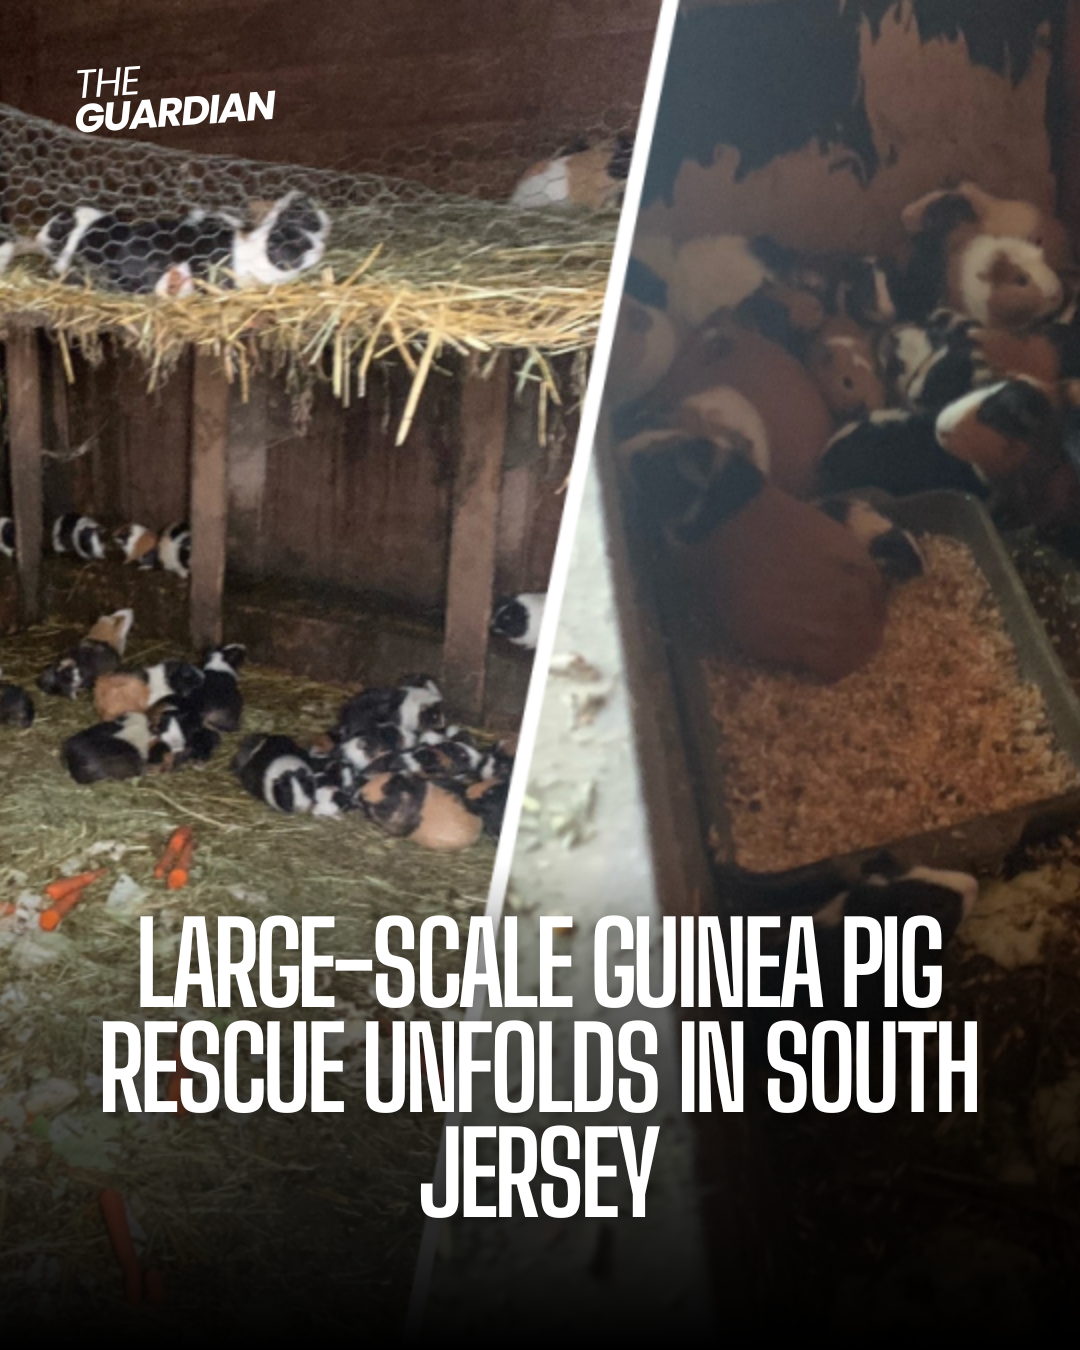 A South Jersey animal control department jumped into action, rescuing 197 guinea pigs from horrible conditions.